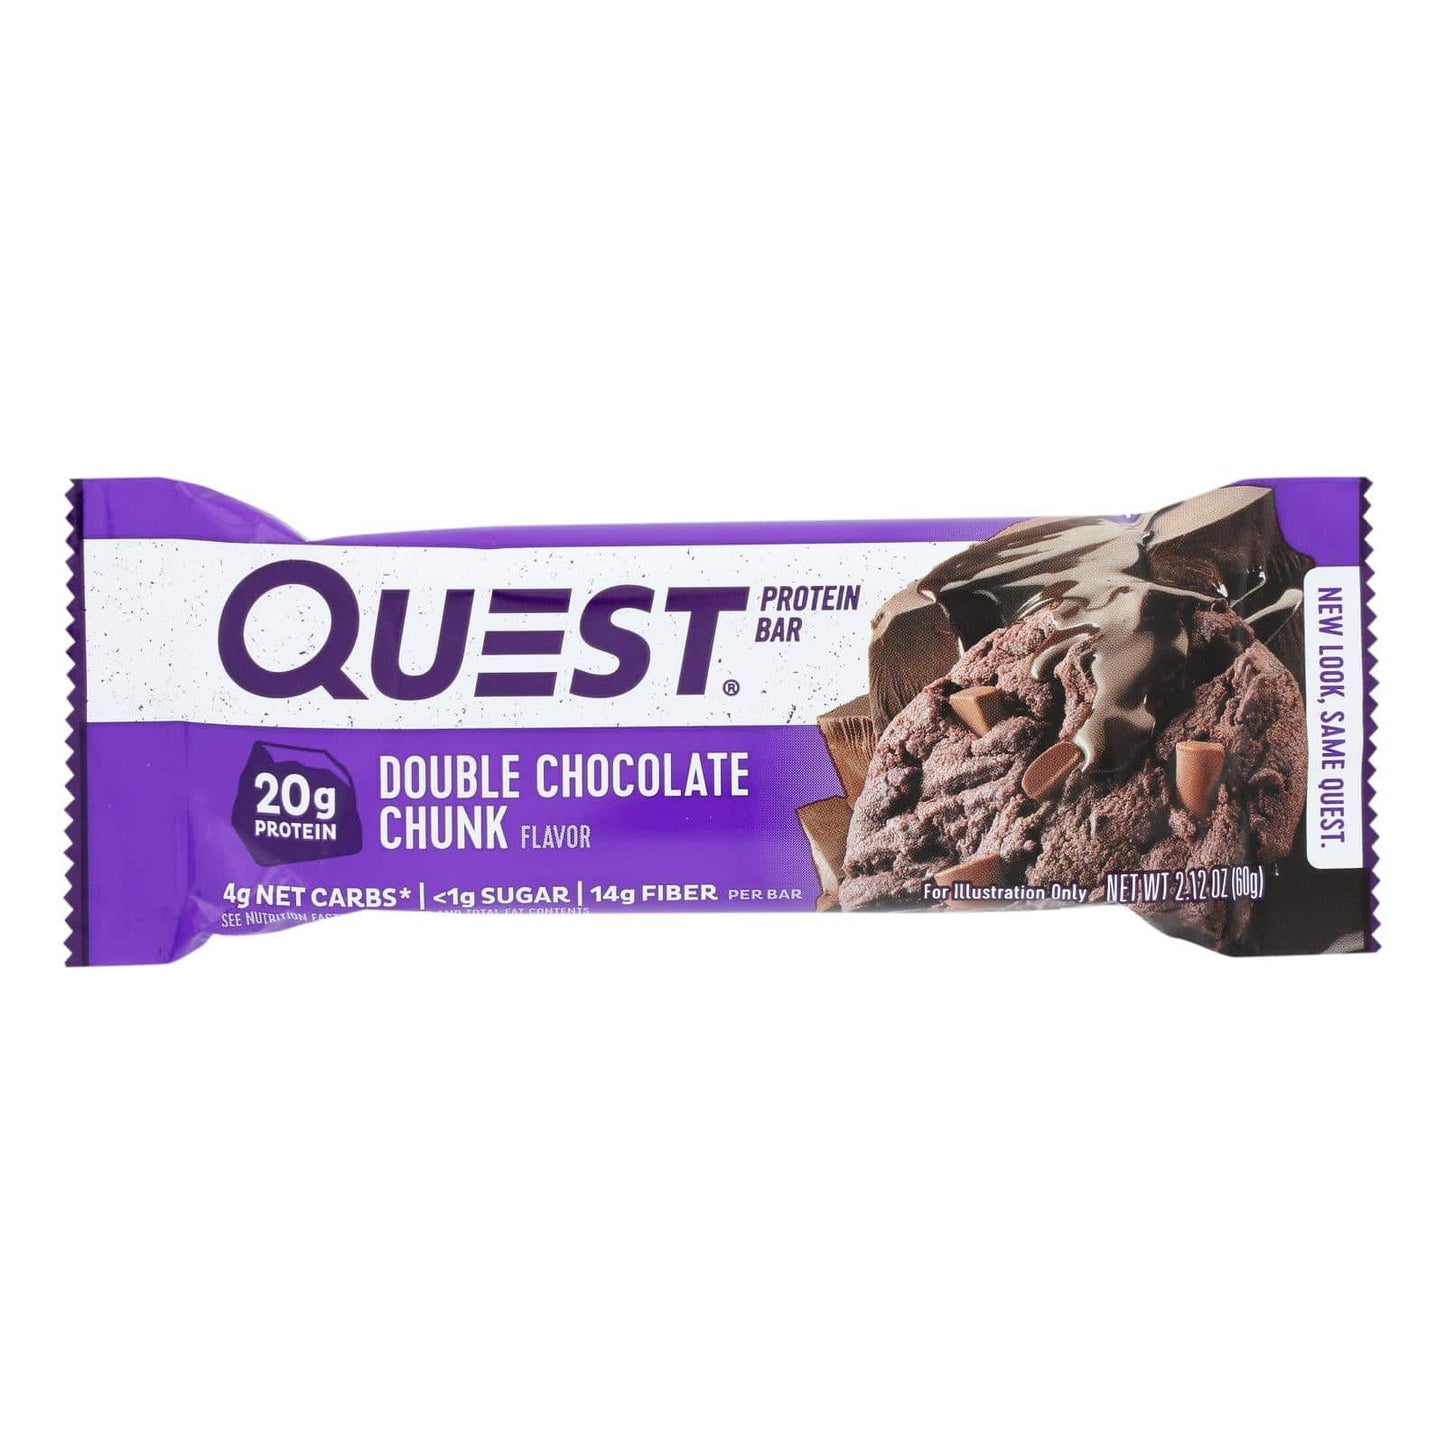 Buy Quest Bar - Double Chocolate Chunk - 2.12 Oz - Case Of 12  at OnlyNaturals.us